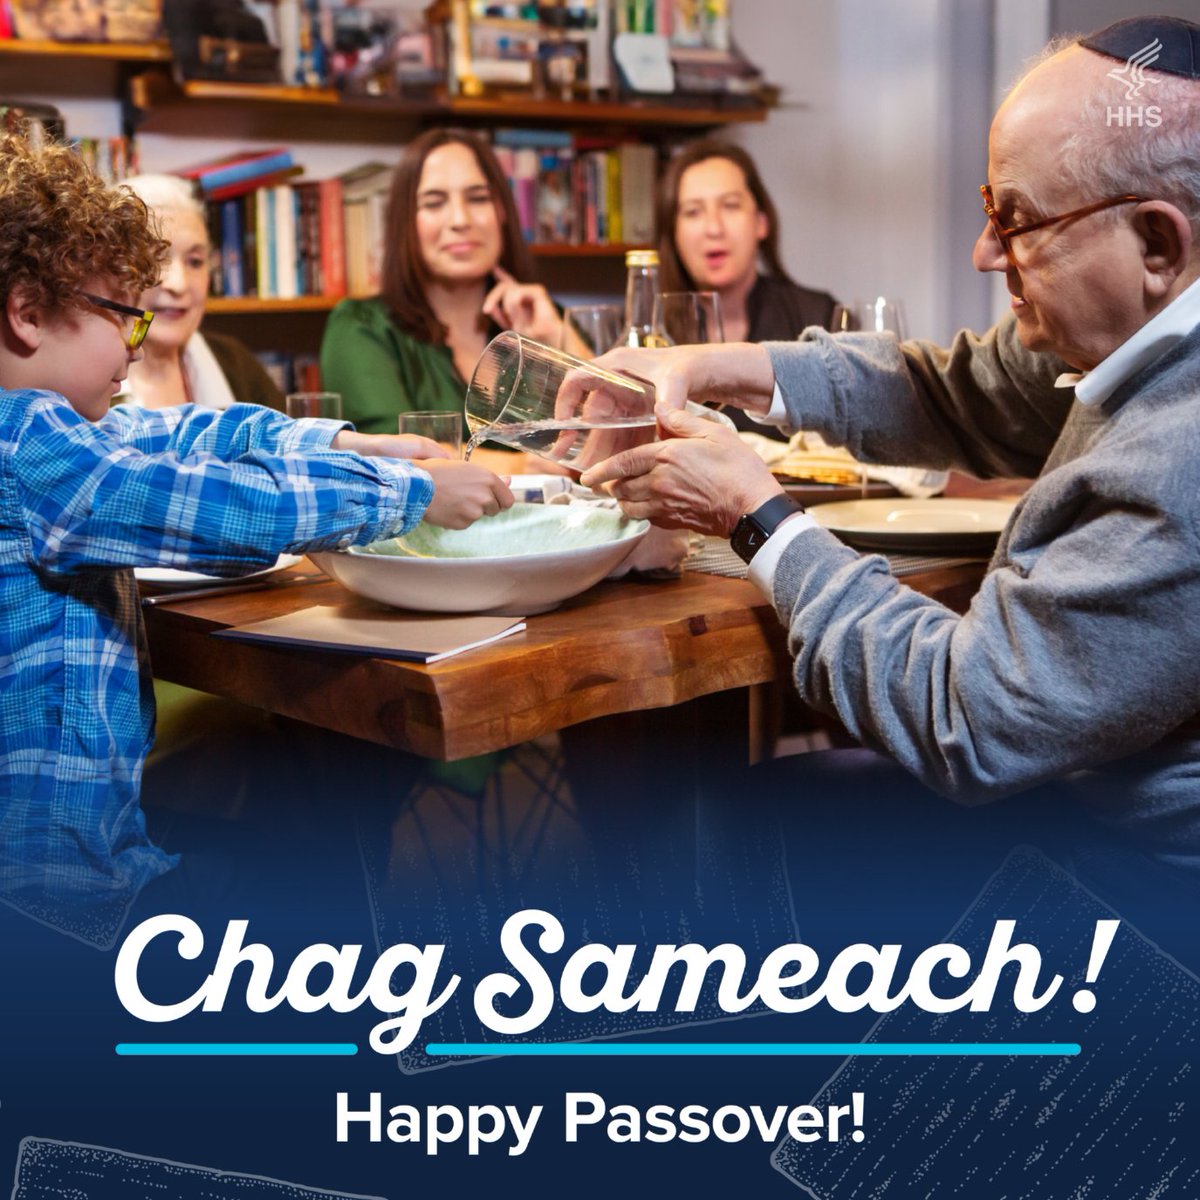 Wishing a chag sameach to all those celebrating Passover this week.